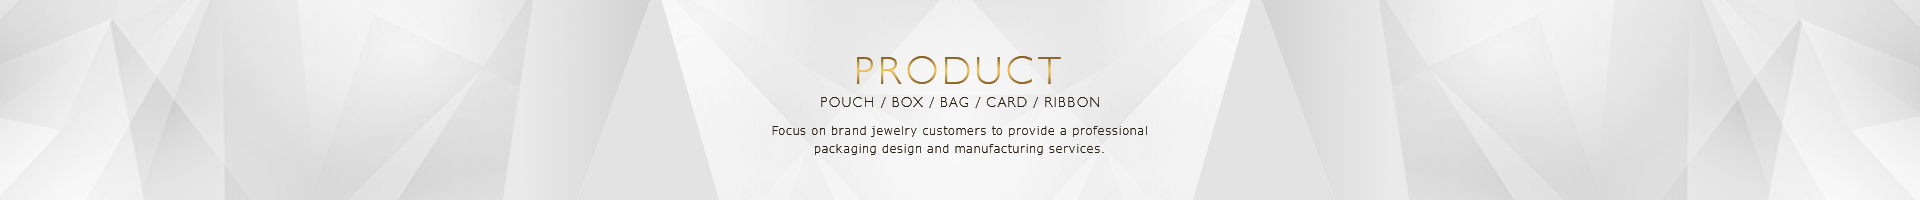 Designer excellent work personalization custom necklace jewelry gift box - Necklace boxes